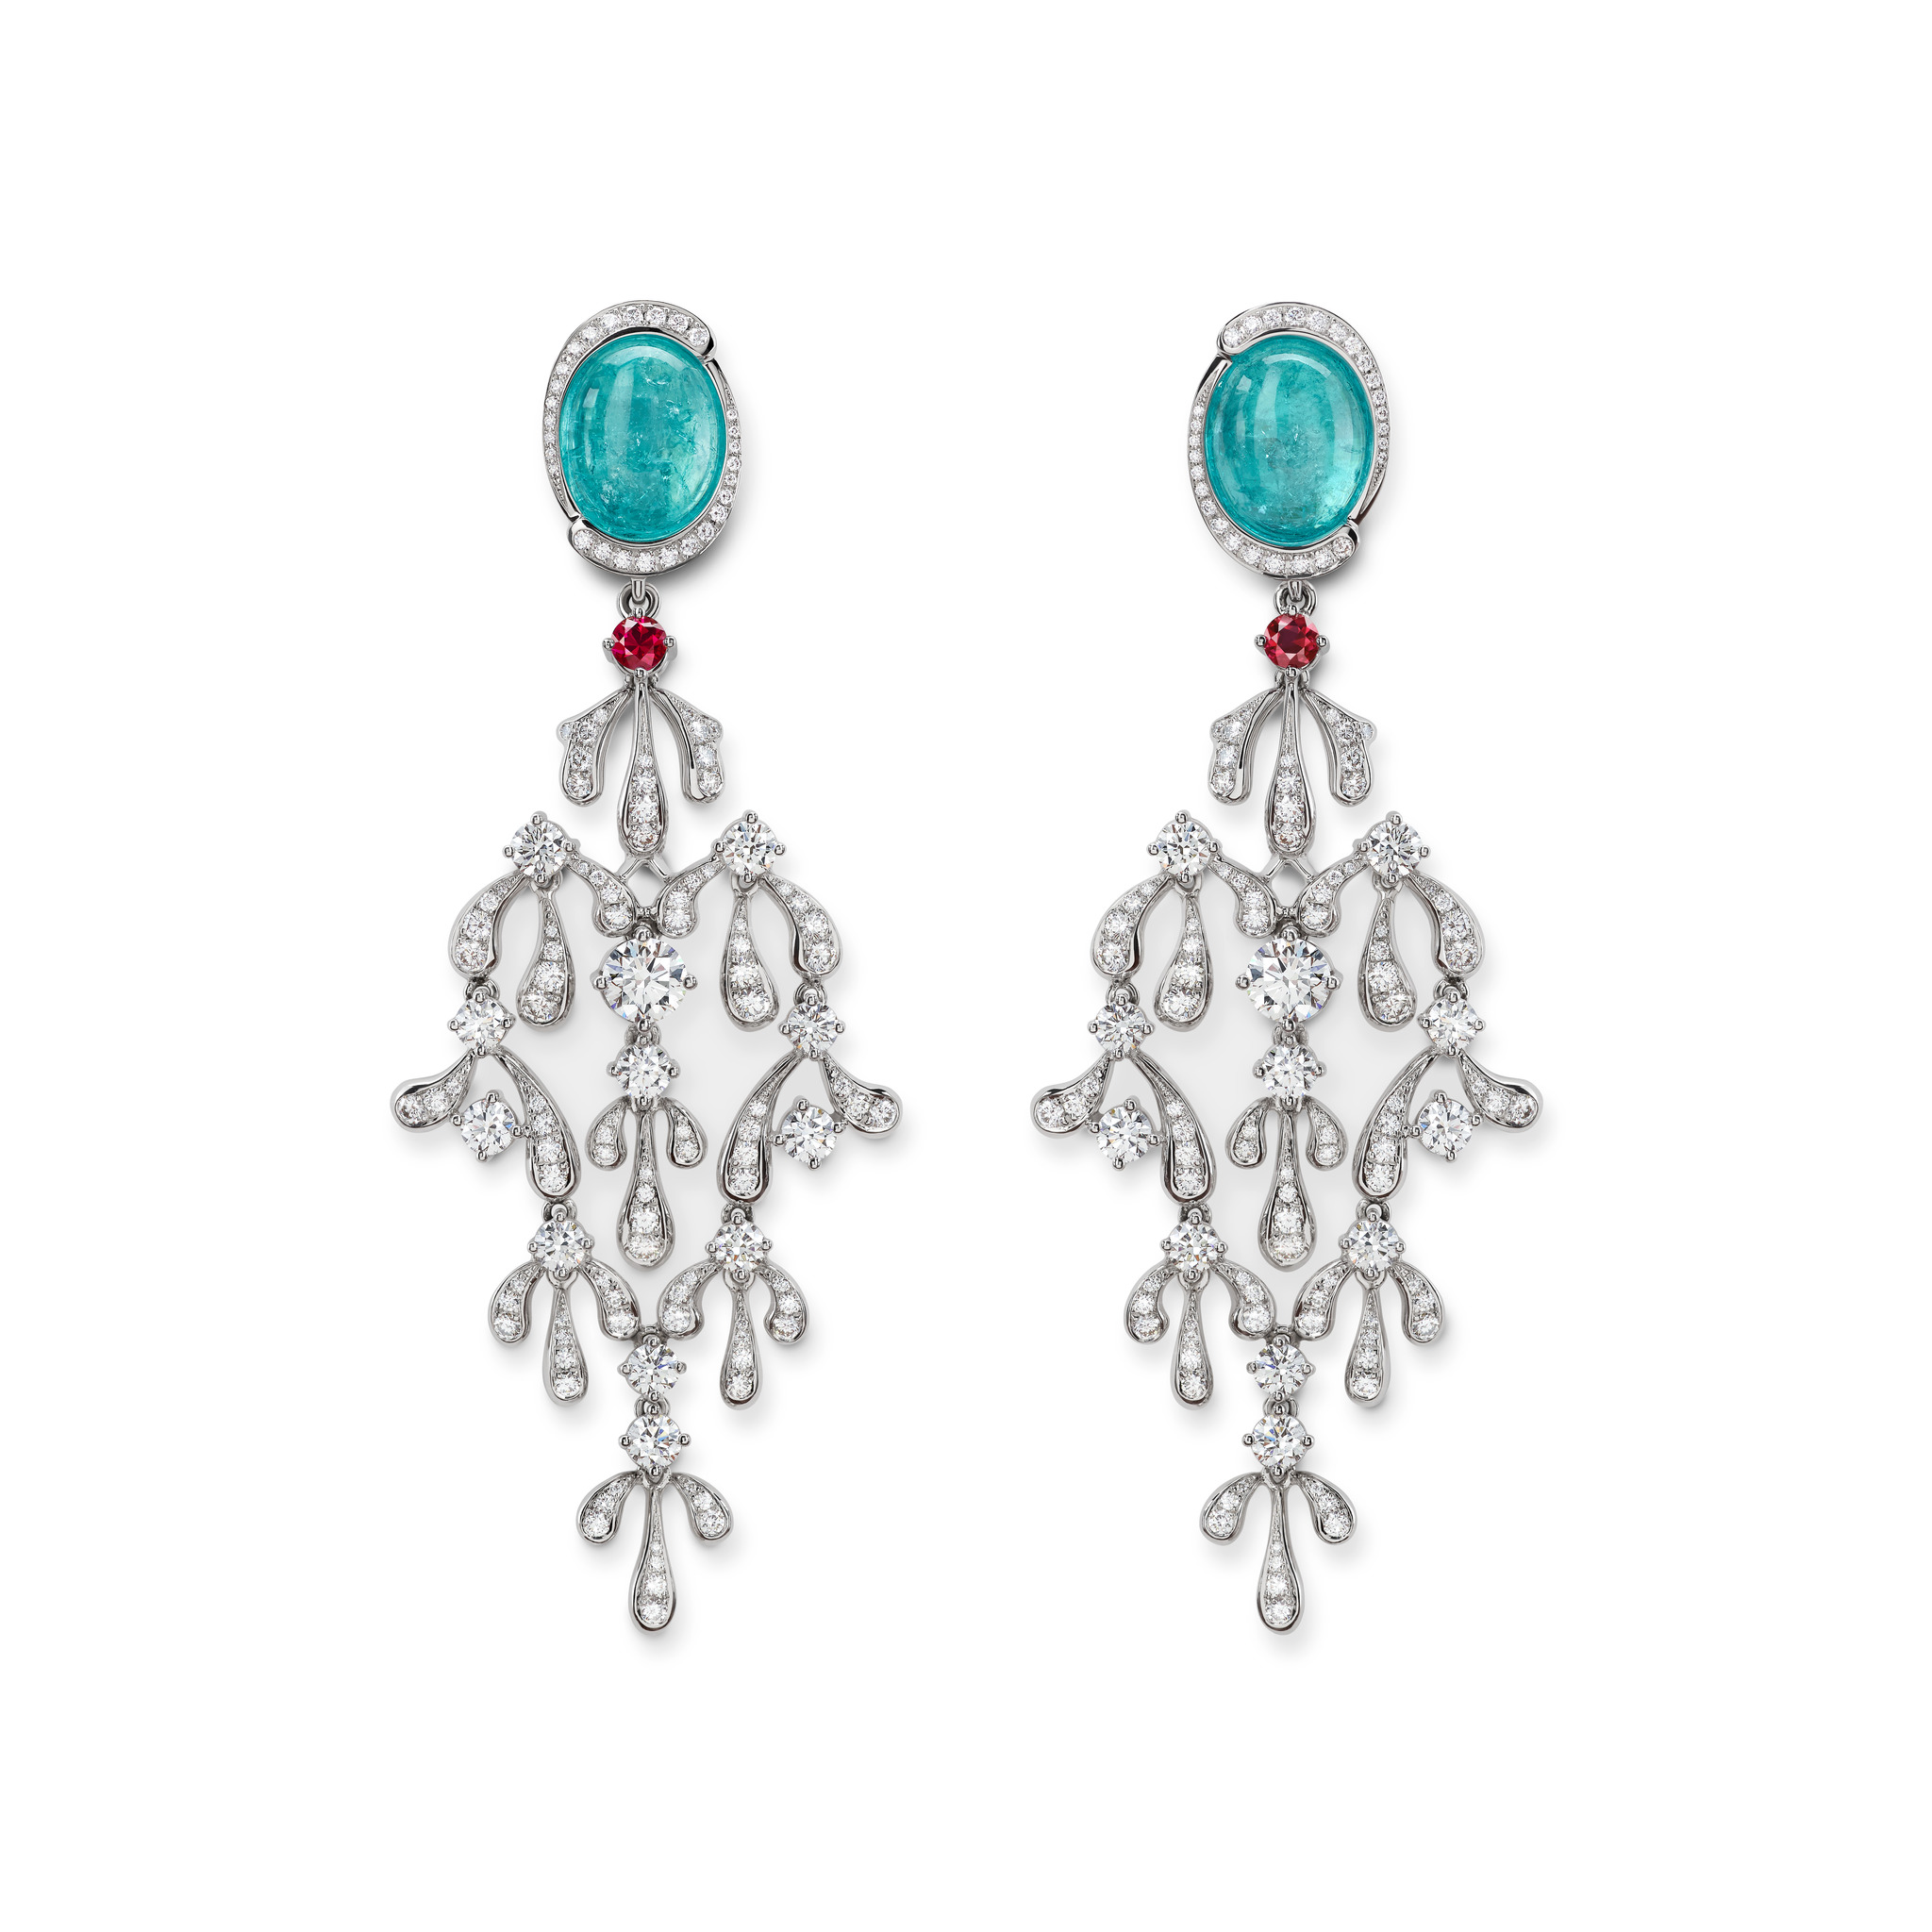 Earrings with tourmalines